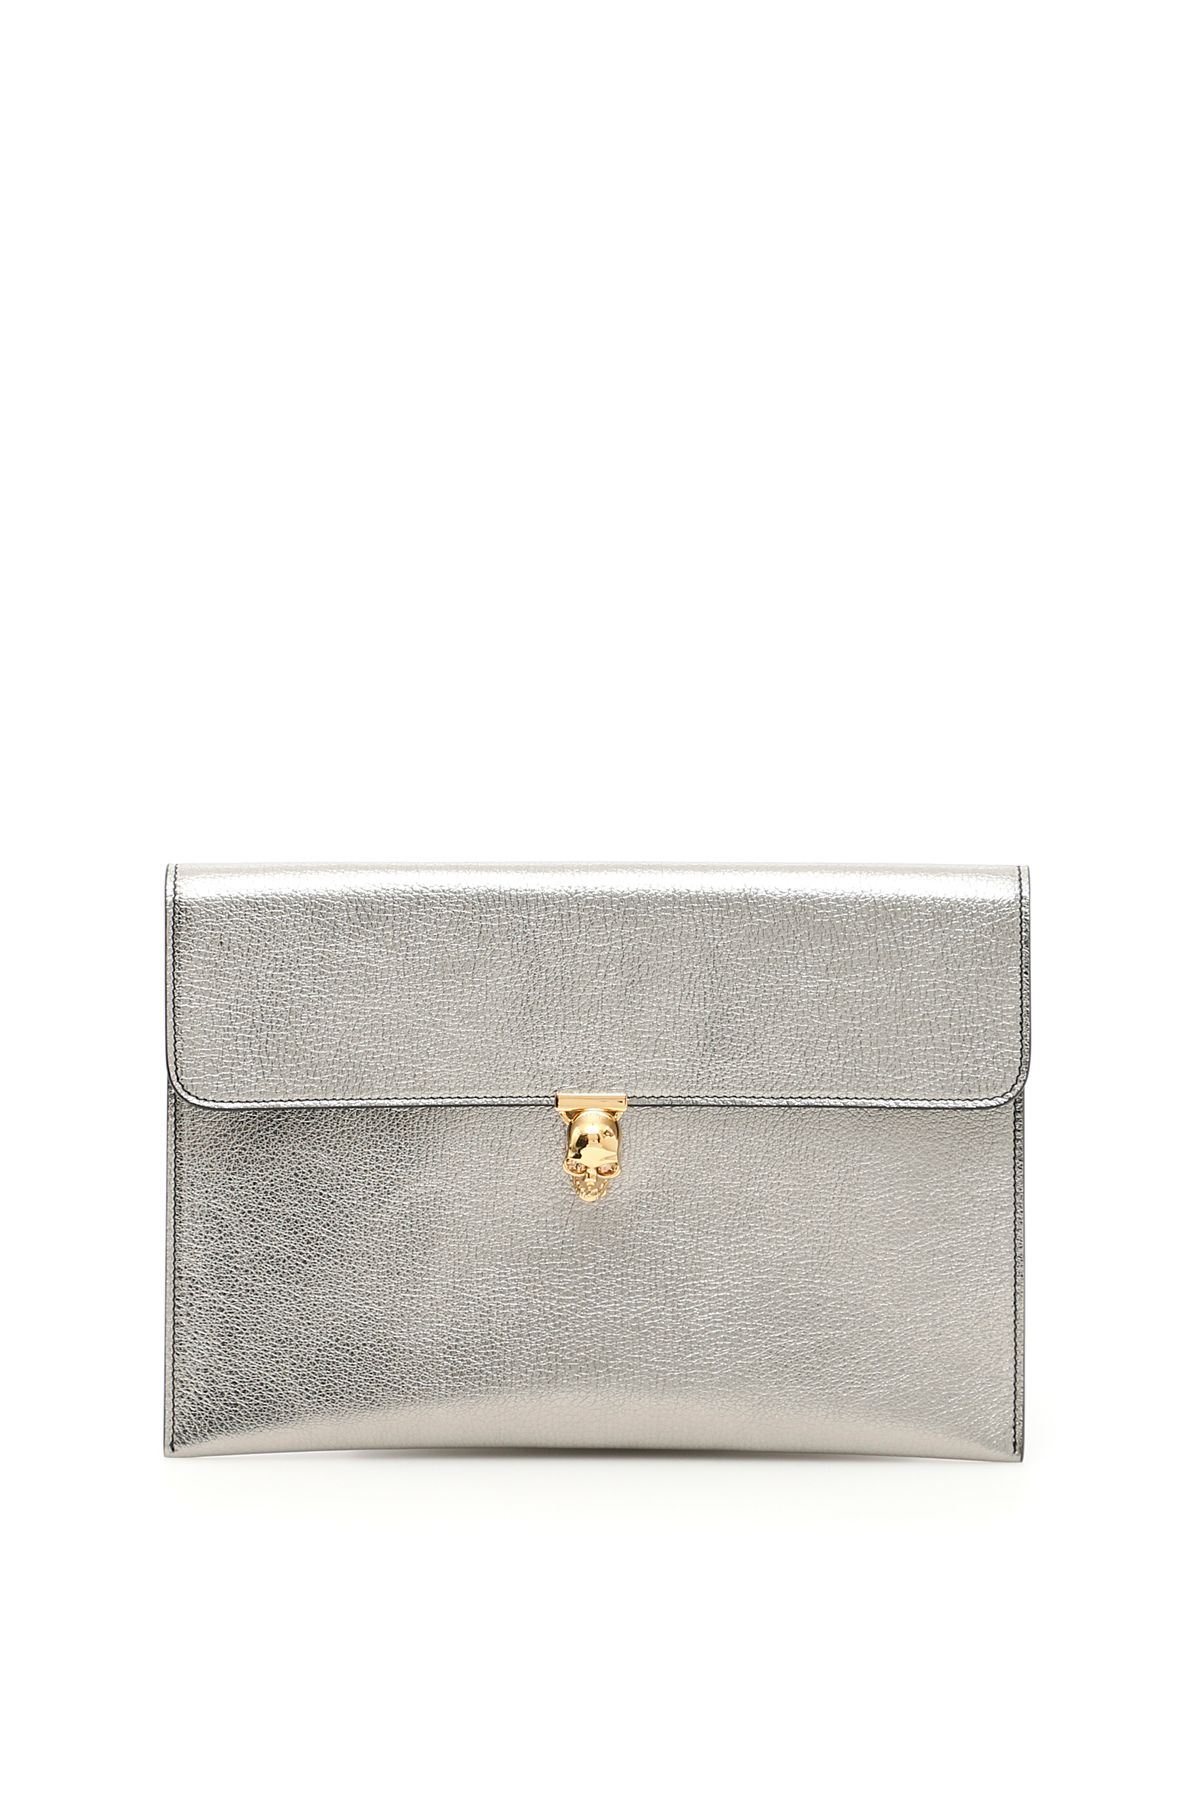 Alexander McQueen - Envelope Clutch | ABOUT ICONS